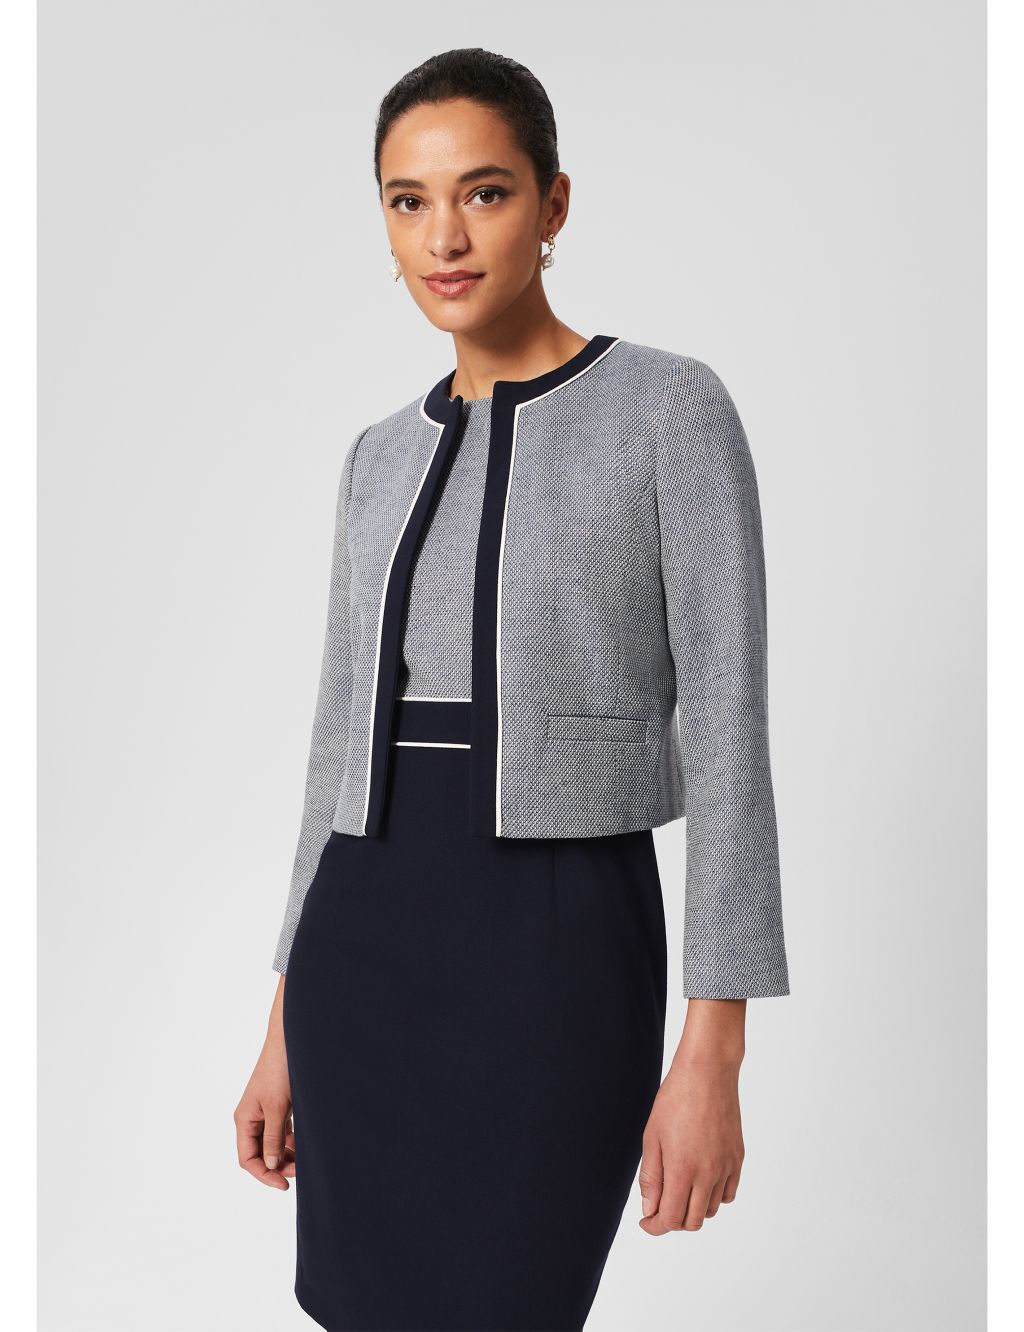 Textured Cropped Blazer with Linen image 1